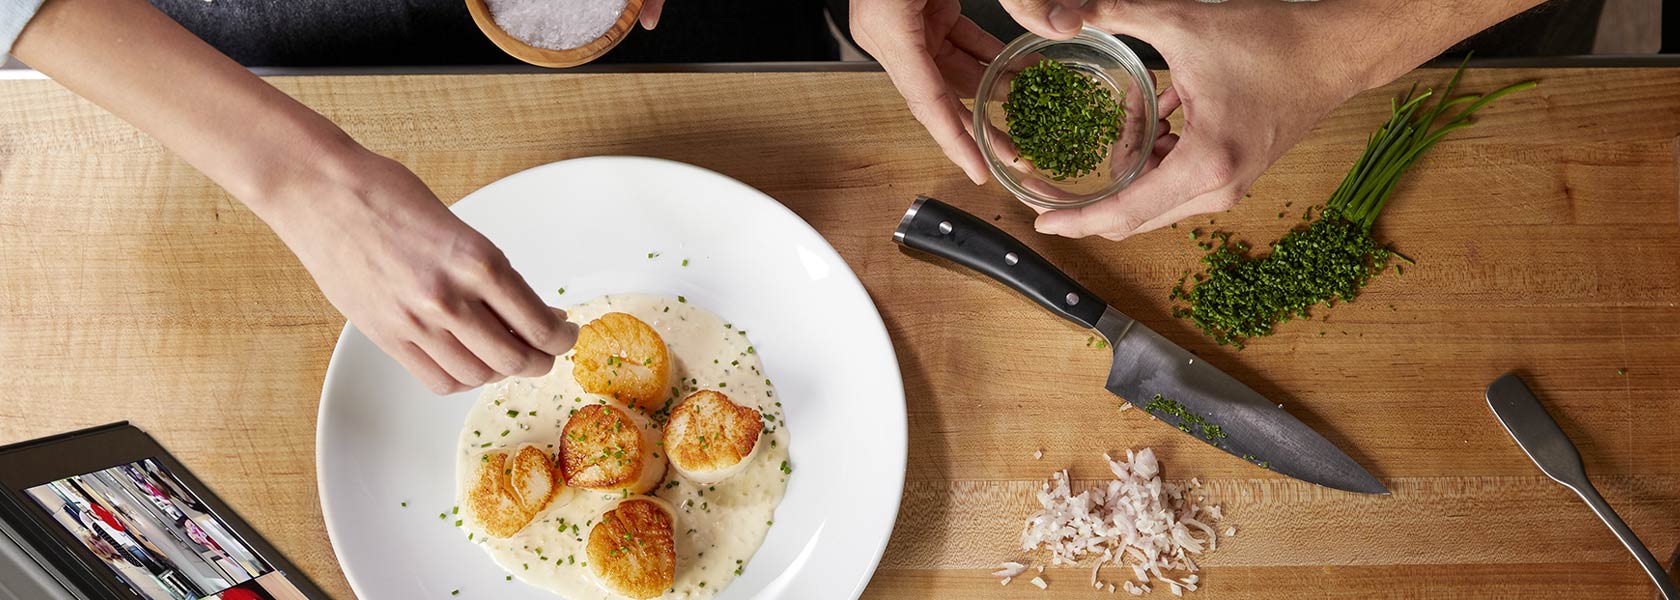 two chefs seasoning sea scallops with herbs